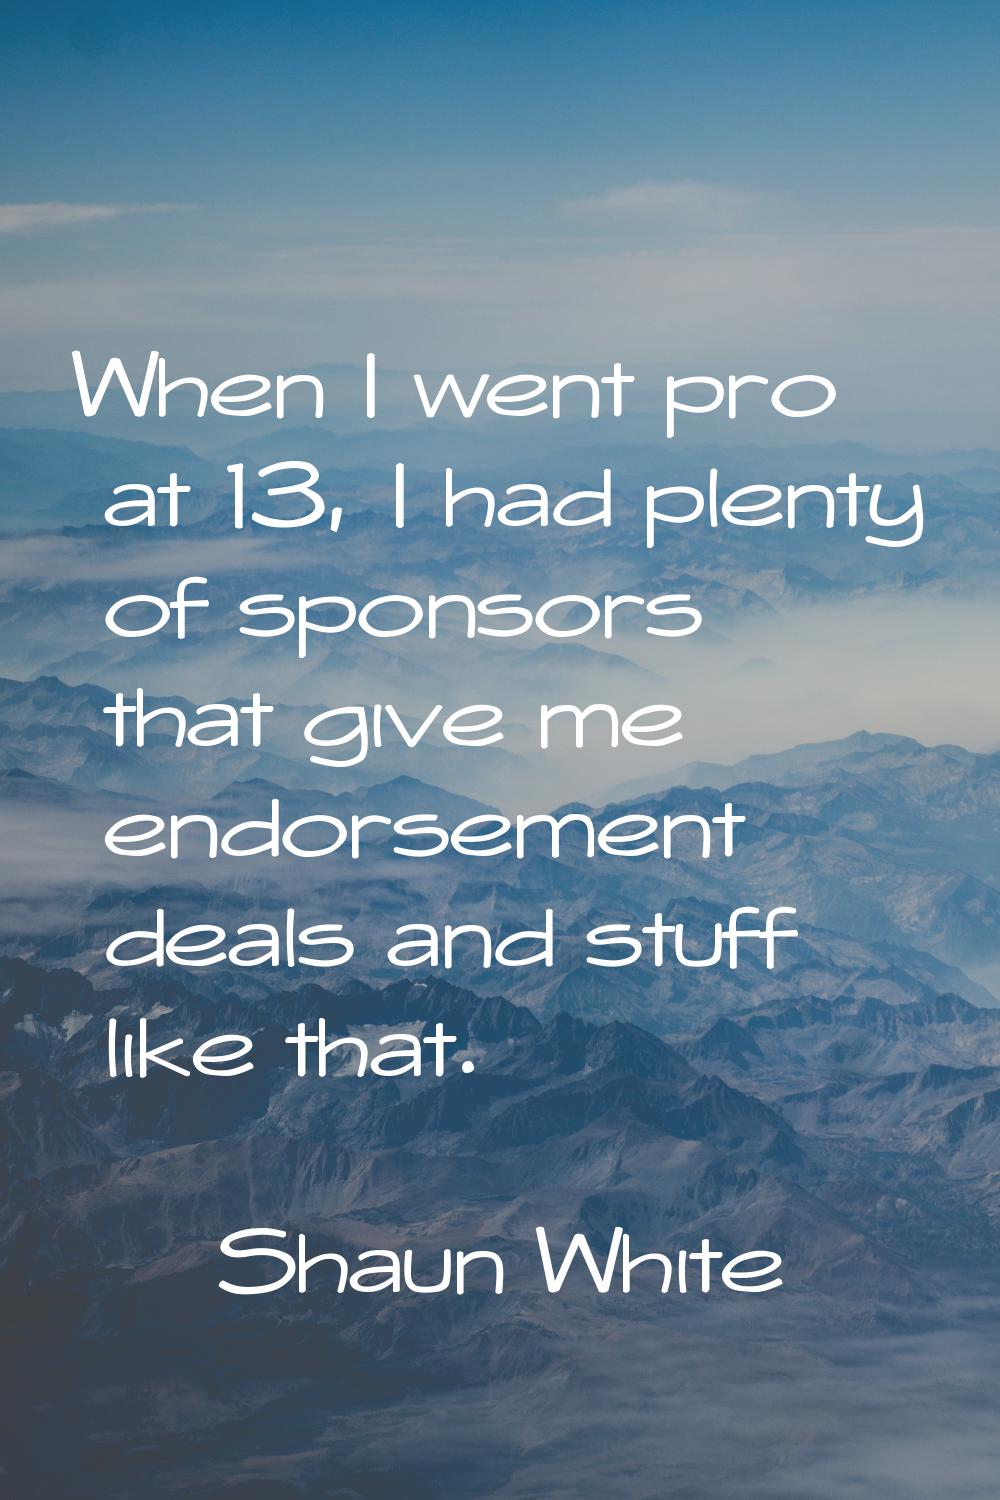 When I went pro at 13, I had plenty of sponsors that give me endorsement deals and stuff like that.